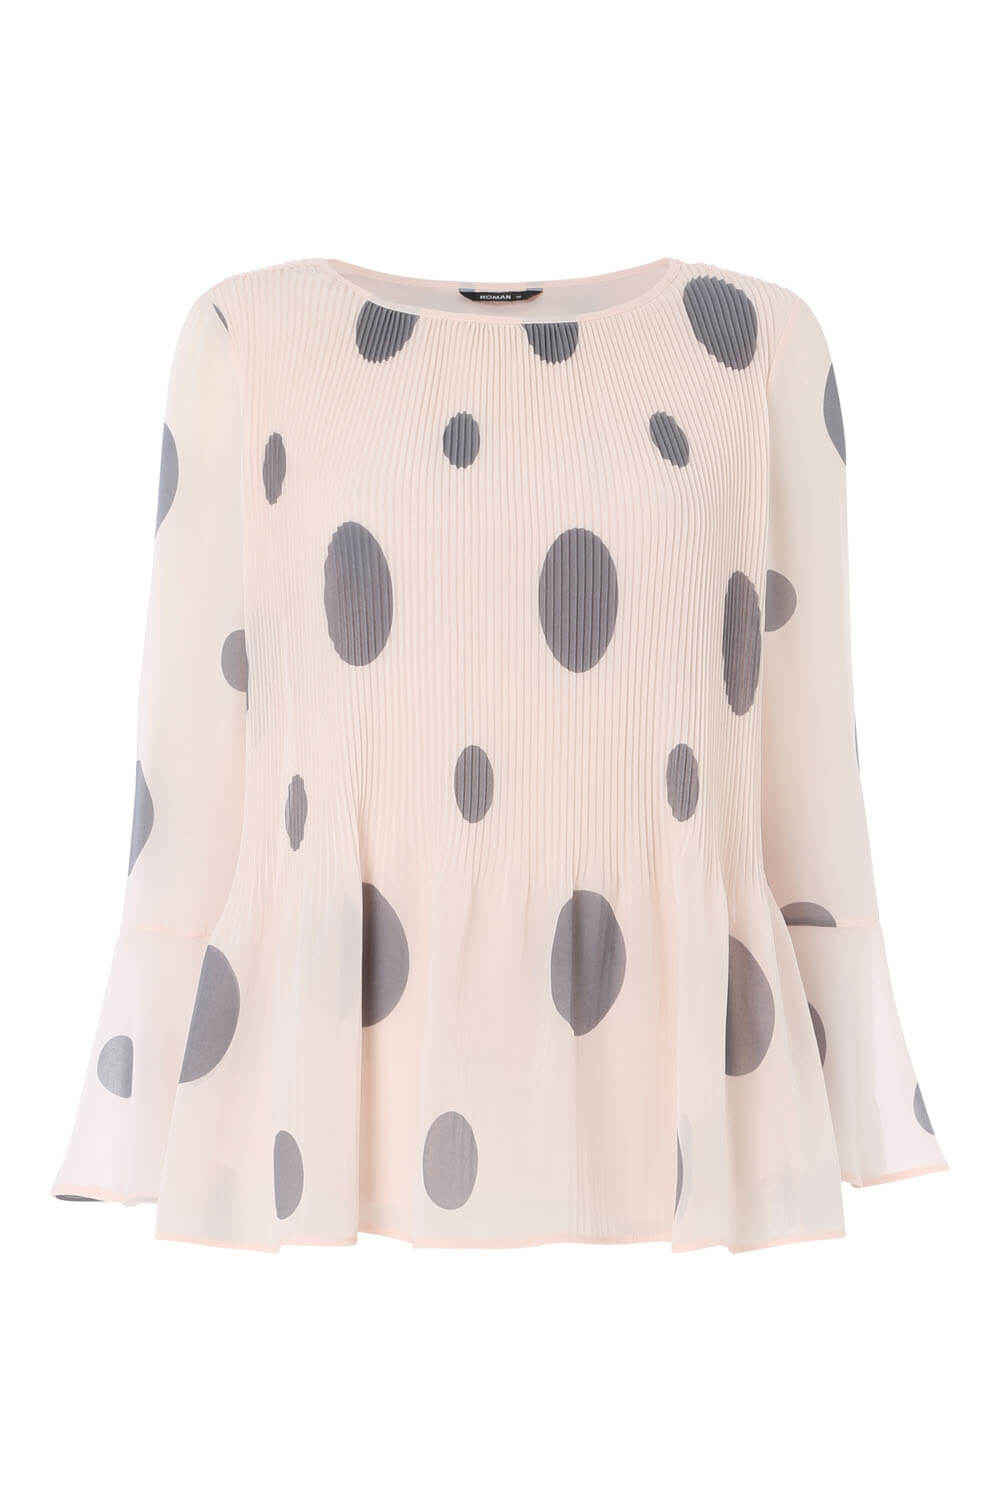 PINK Spot Print Pleated top , Image 4 of 8